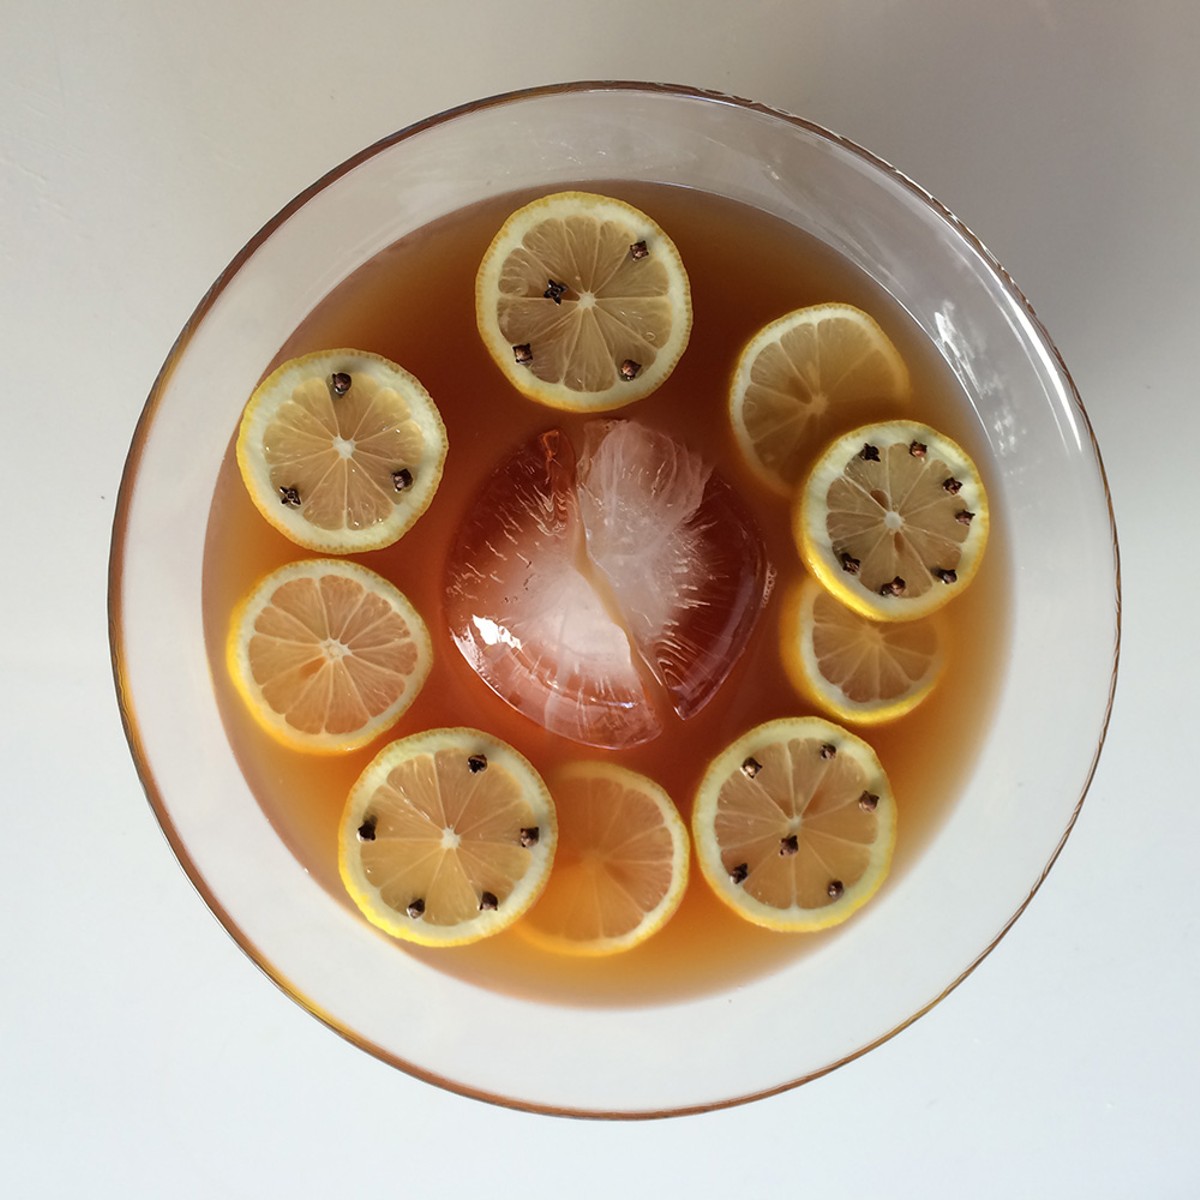 Fish House Punch: The holiday drink so strong it'll make you forget your mother-in-law